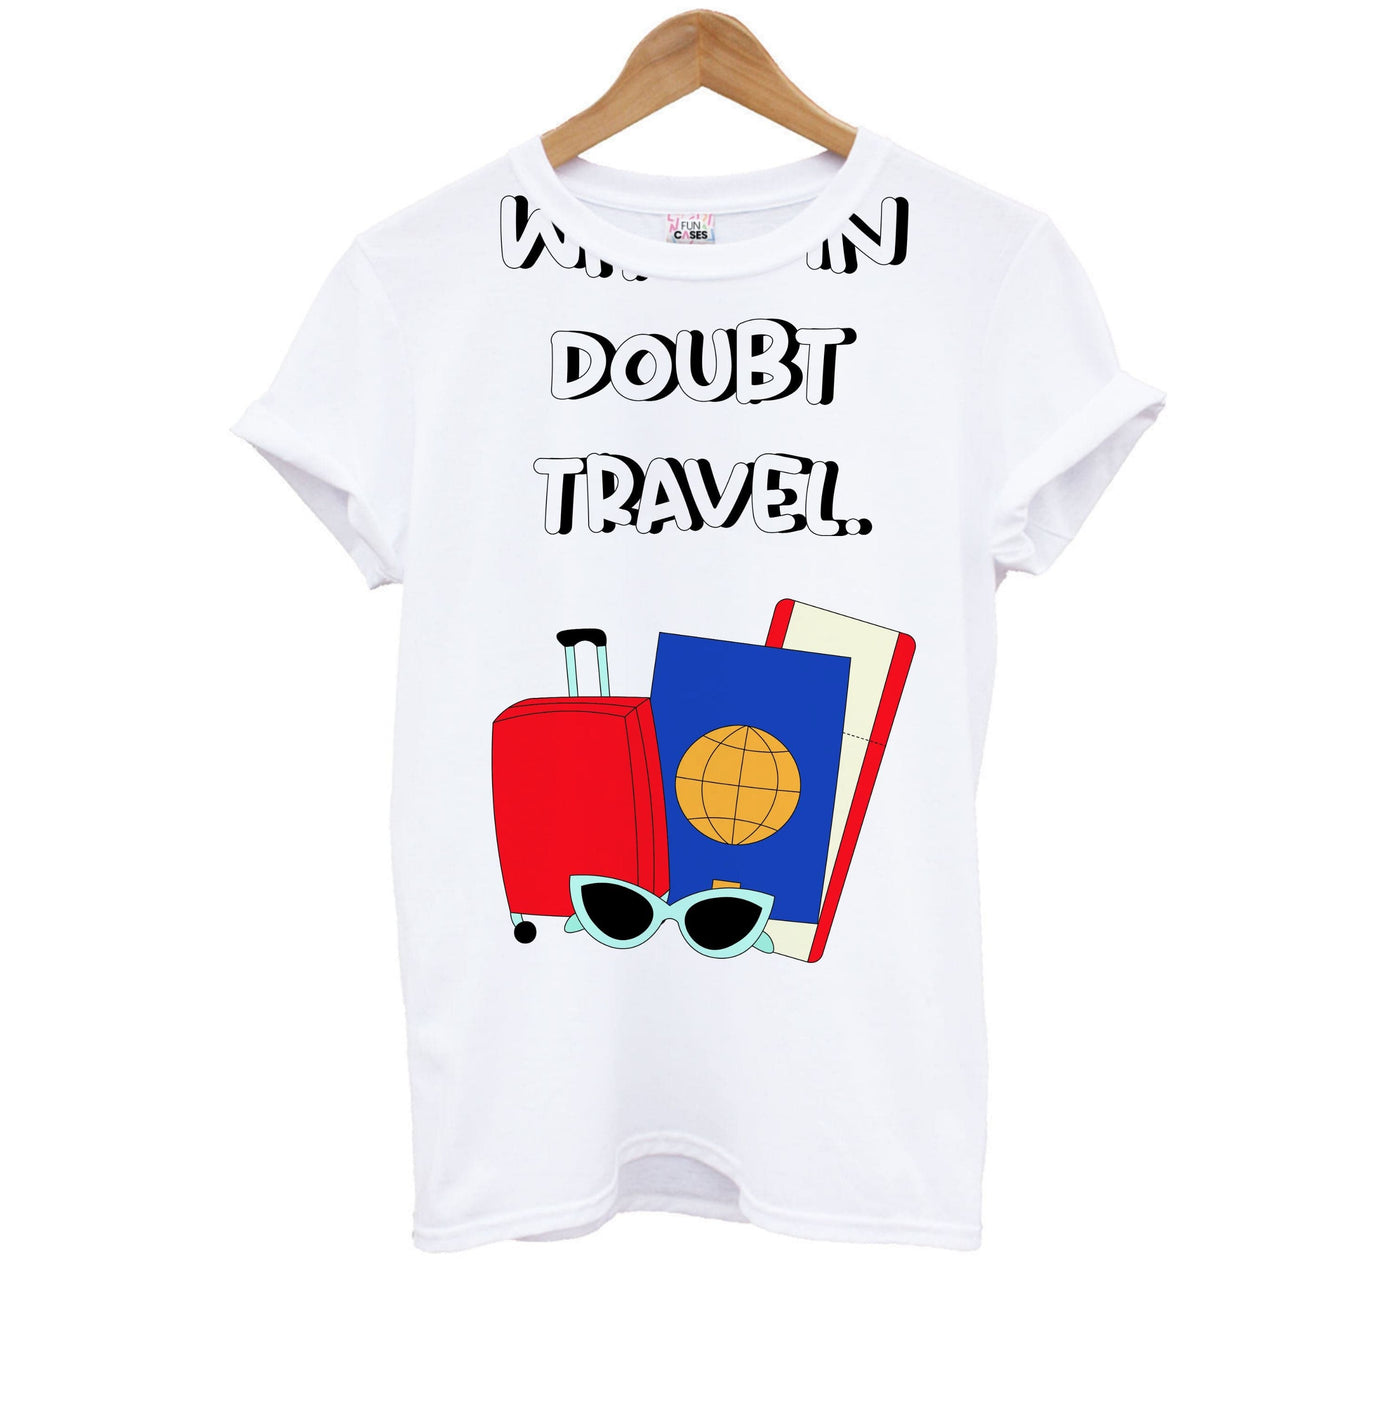 When In Doubt Travel - Travel Kids T-Shirt